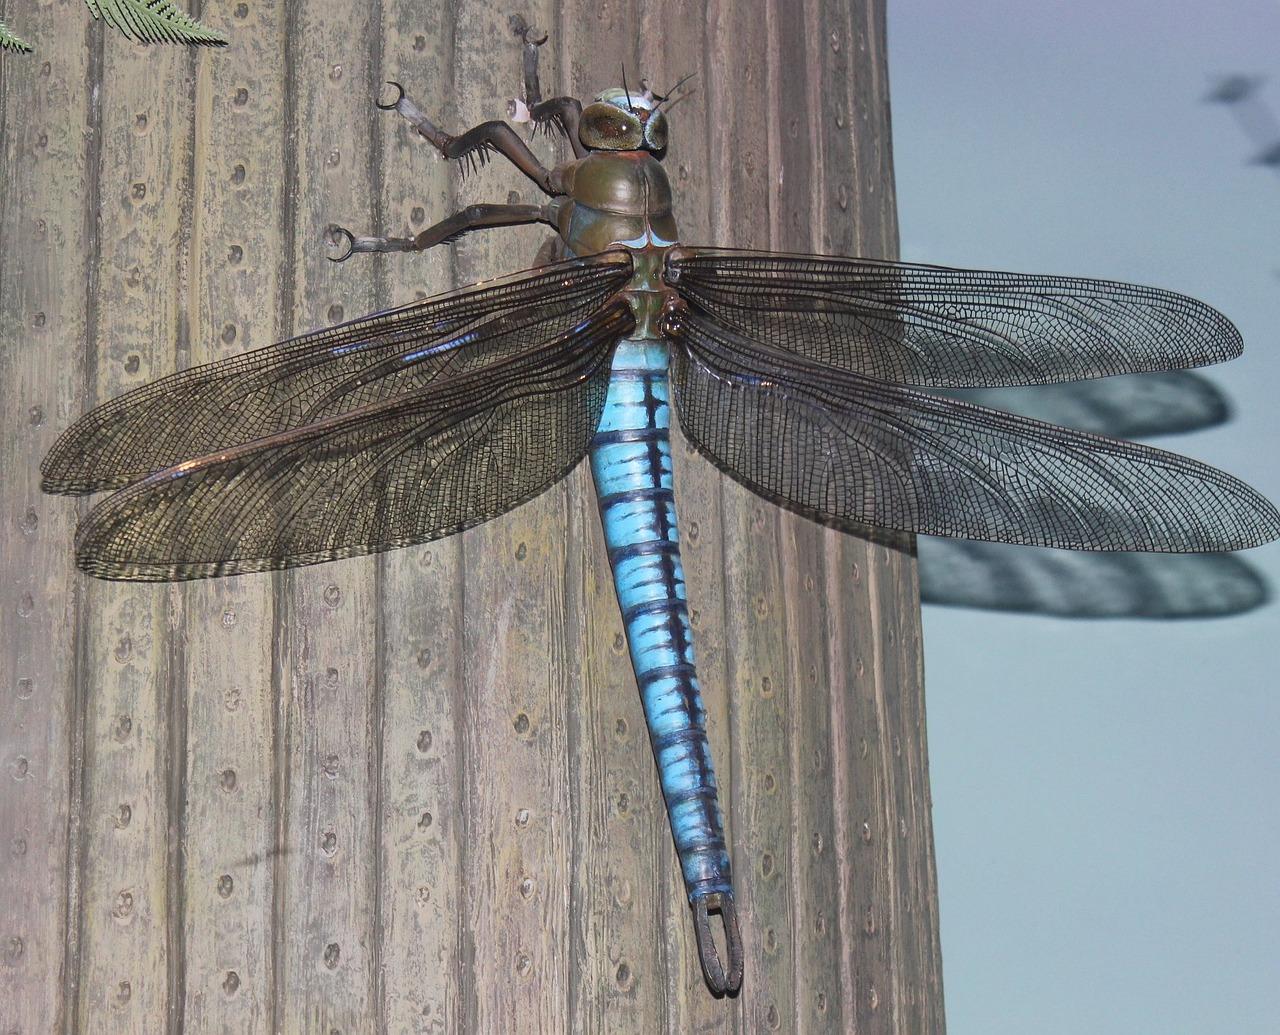 Do dragonflies give live birth? 